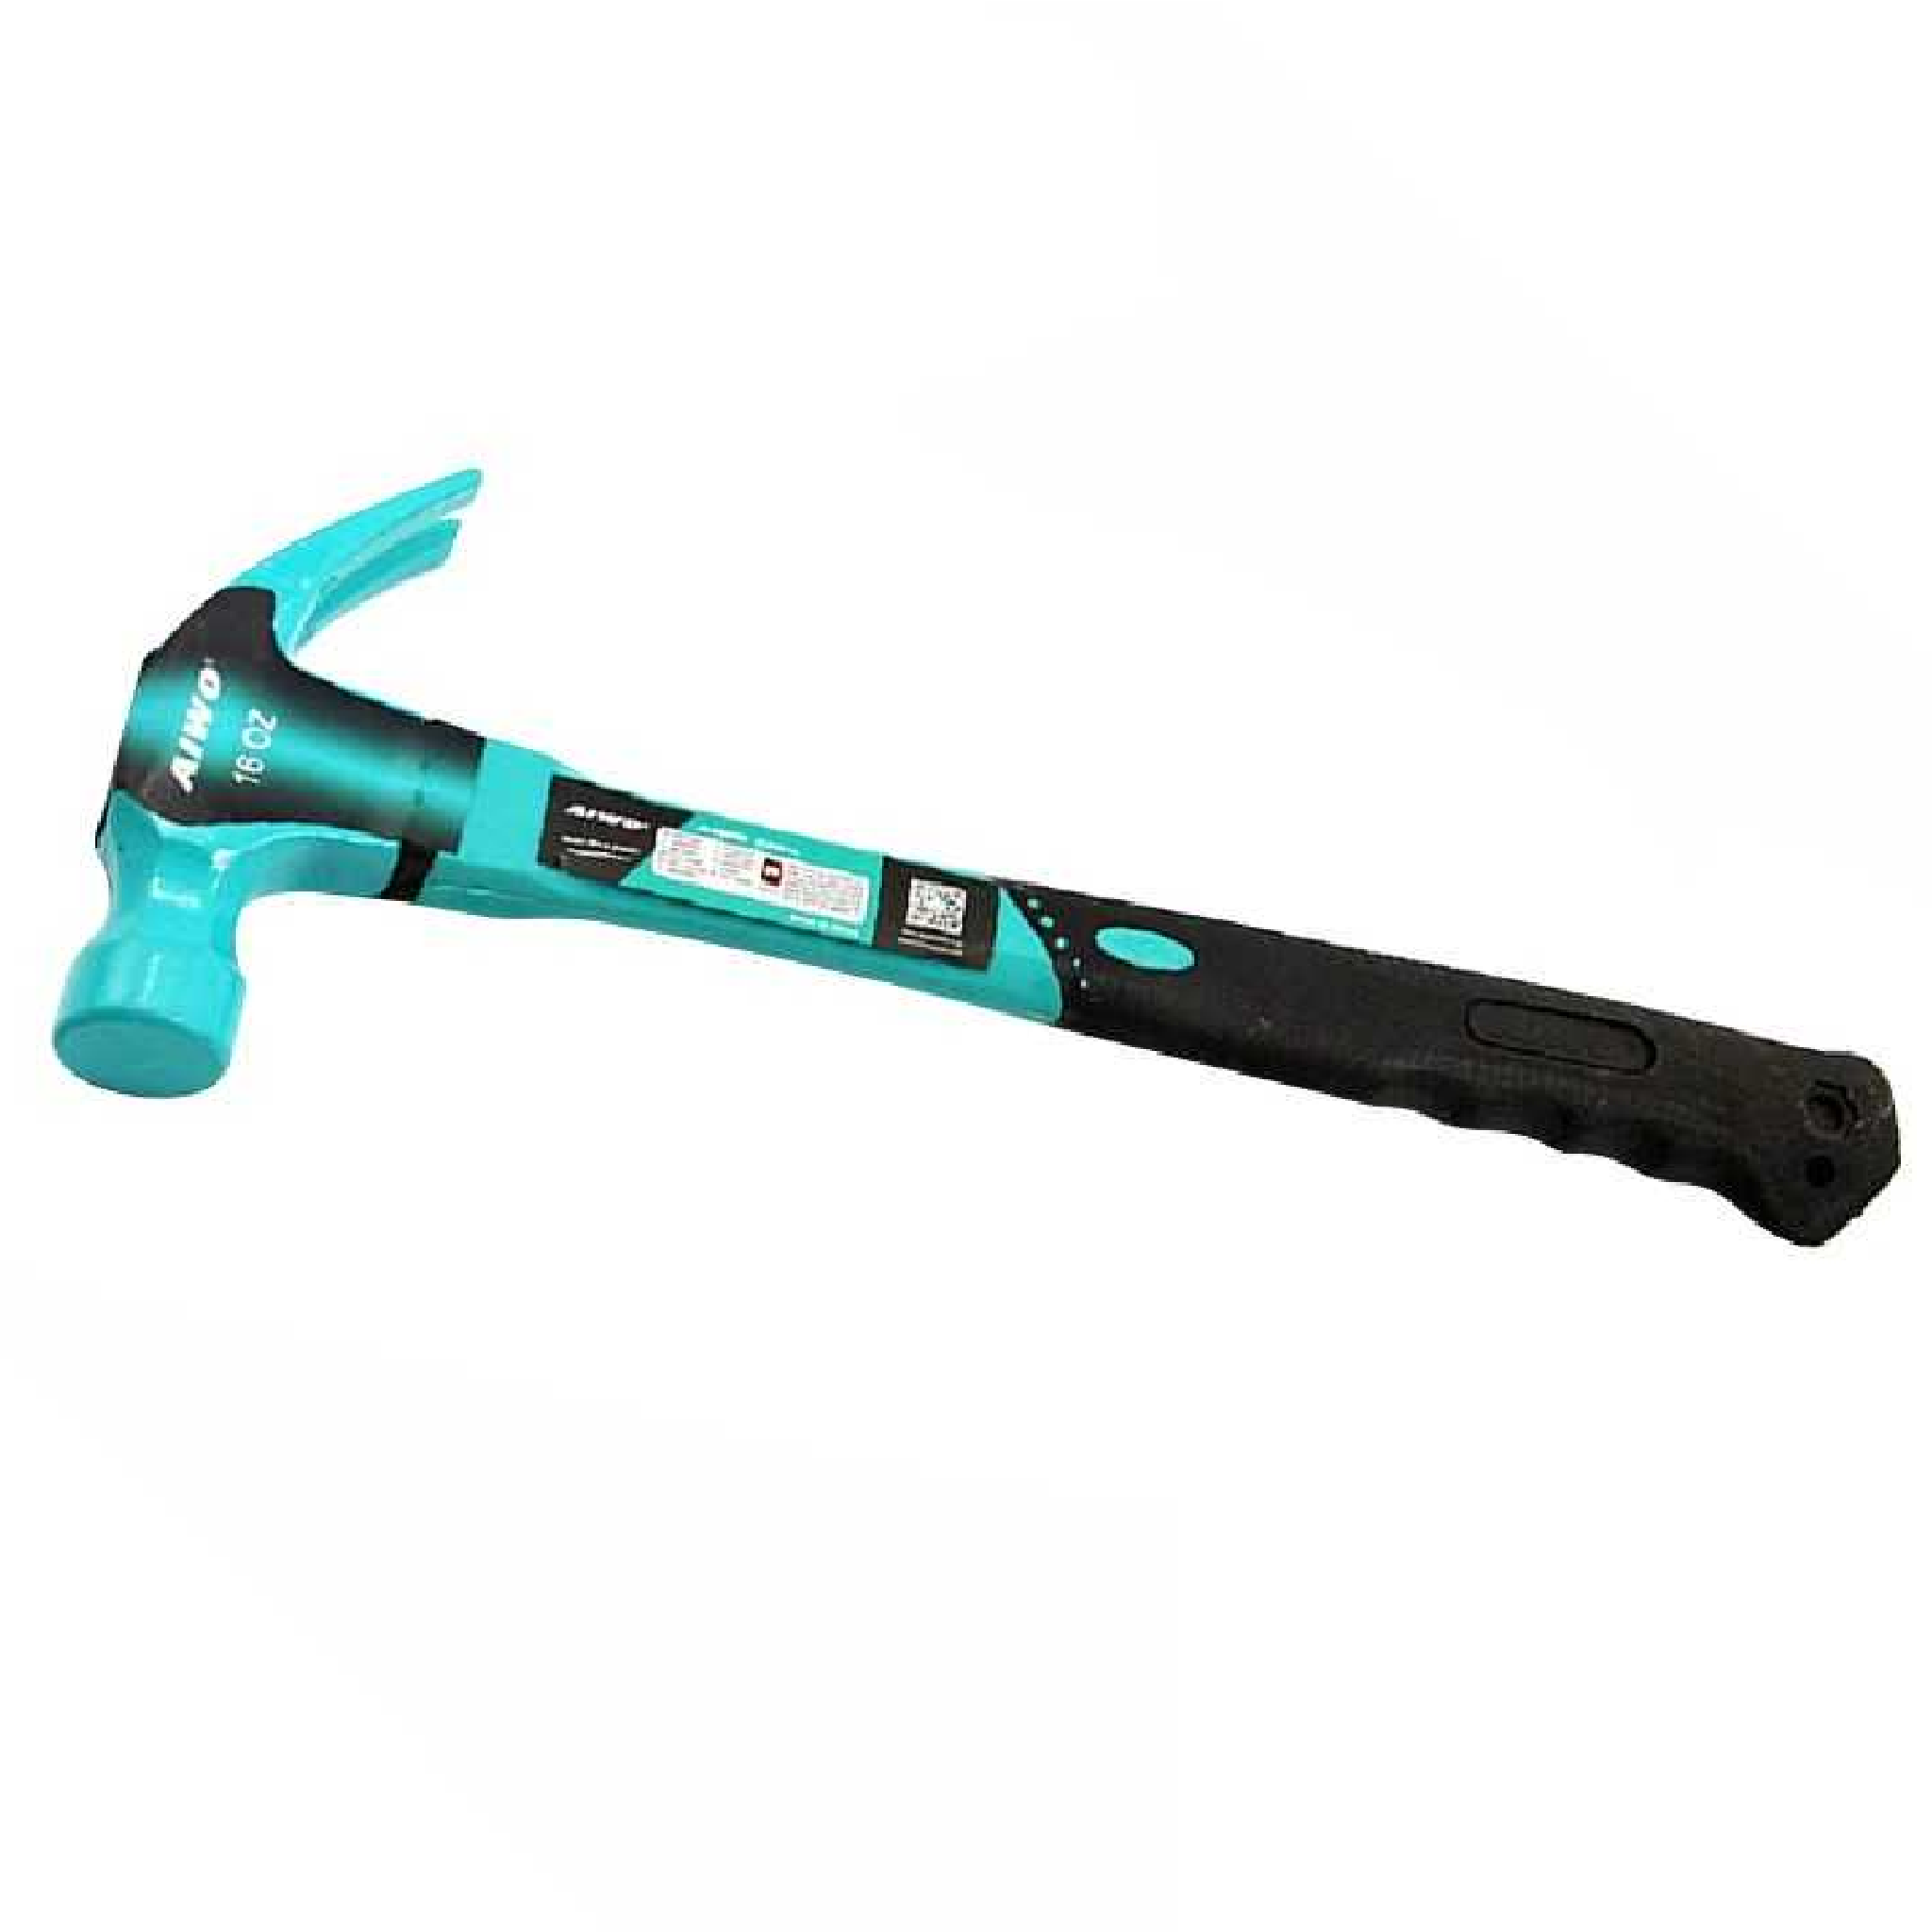 AIWO 16 OZ High Quality Carbon Steel Claw Hammer With Fibre Handle